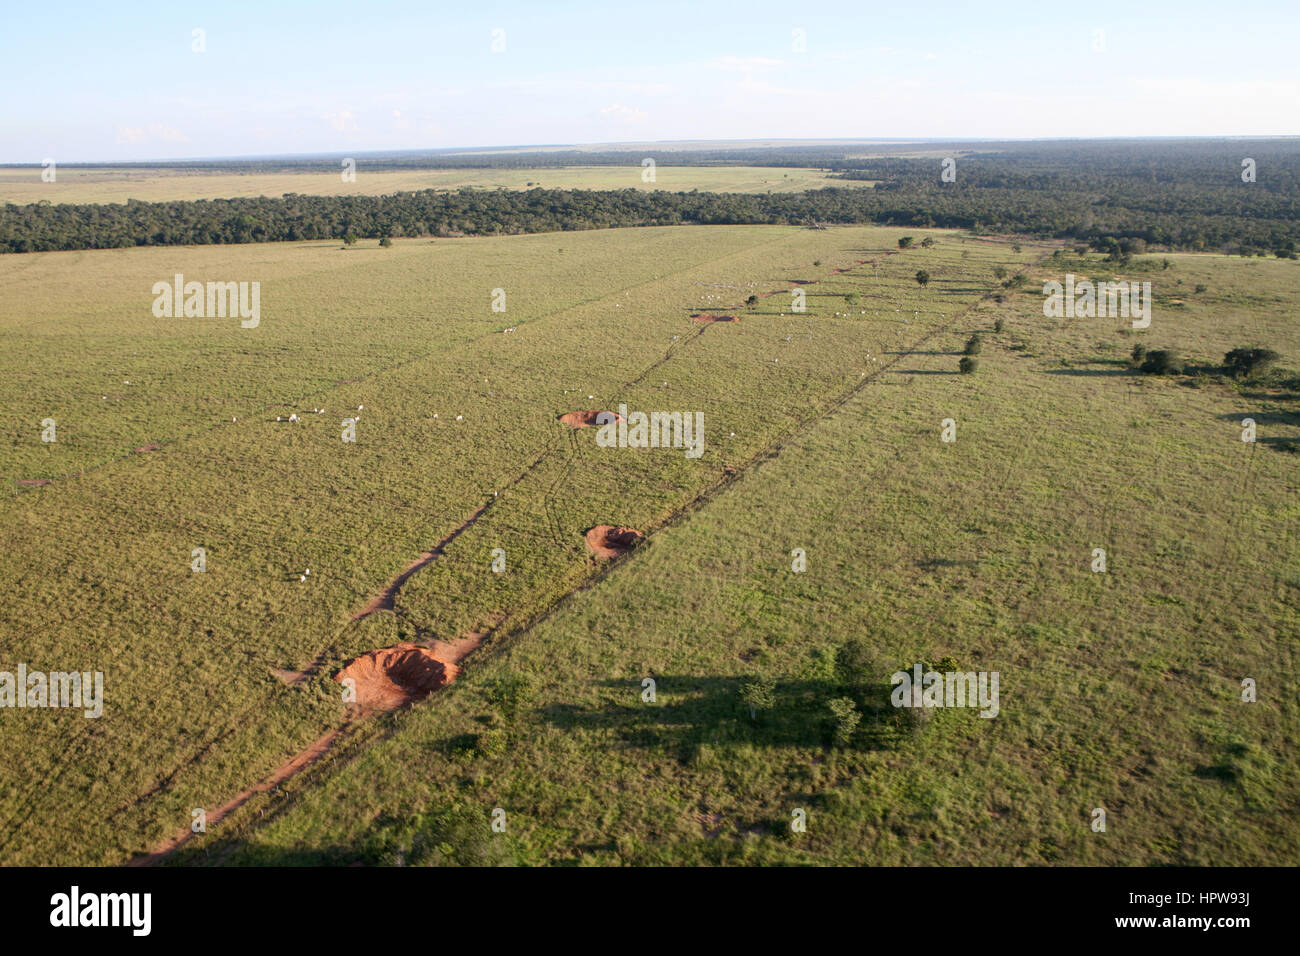 A lrage part of the Amazone has been destroyed and transferred into farmland. The main crops being cultivated are soya, grass for cattle, and maize. Most of the crops are being used for the production of biofuel or exported to the Europe or US for animal fodder Stock Photo